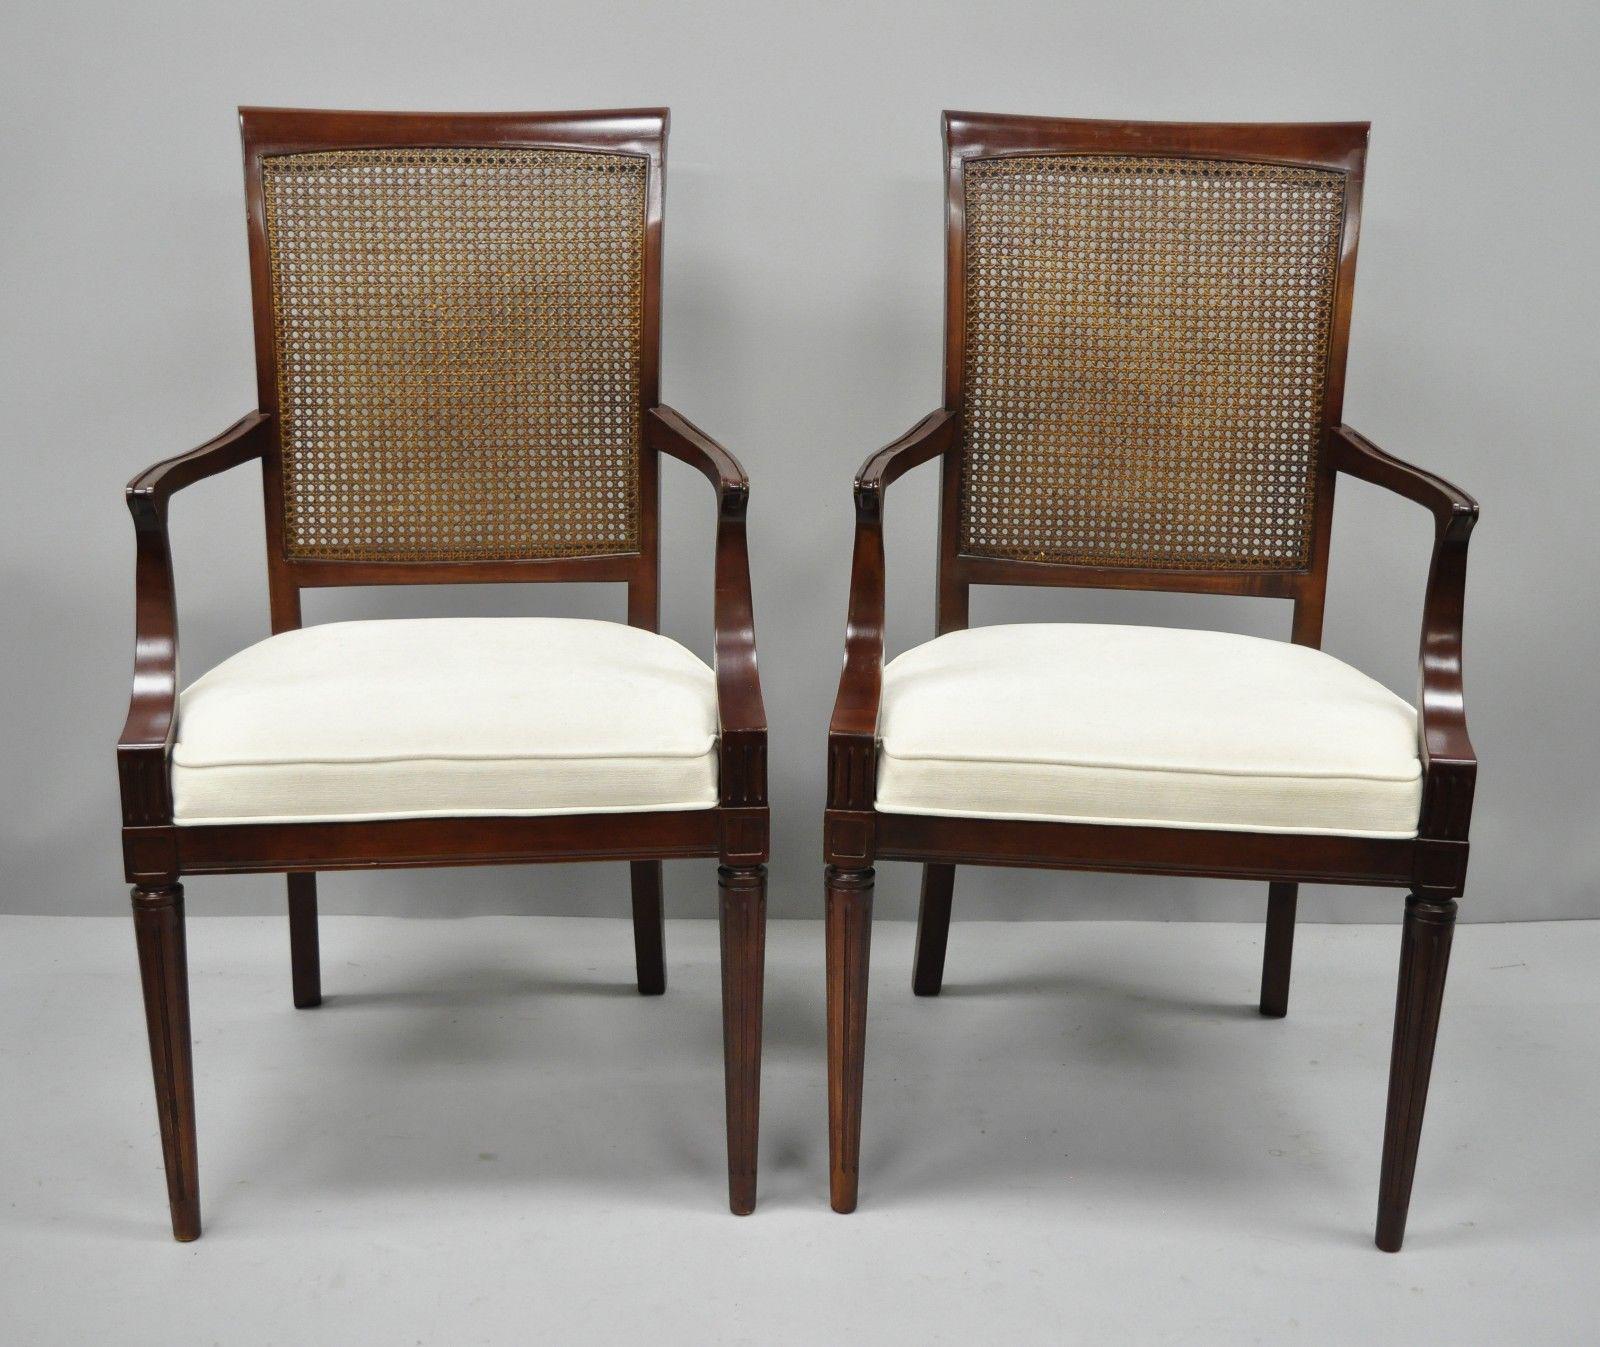 Set of six French Louis XVI style cane back cherrywood dining chairs. Item features four side chairs, two armchairs, dark cherry stain, cane backs, solid wood construction, tapered legs, and quality American craftsmanship, circa late 20th century.